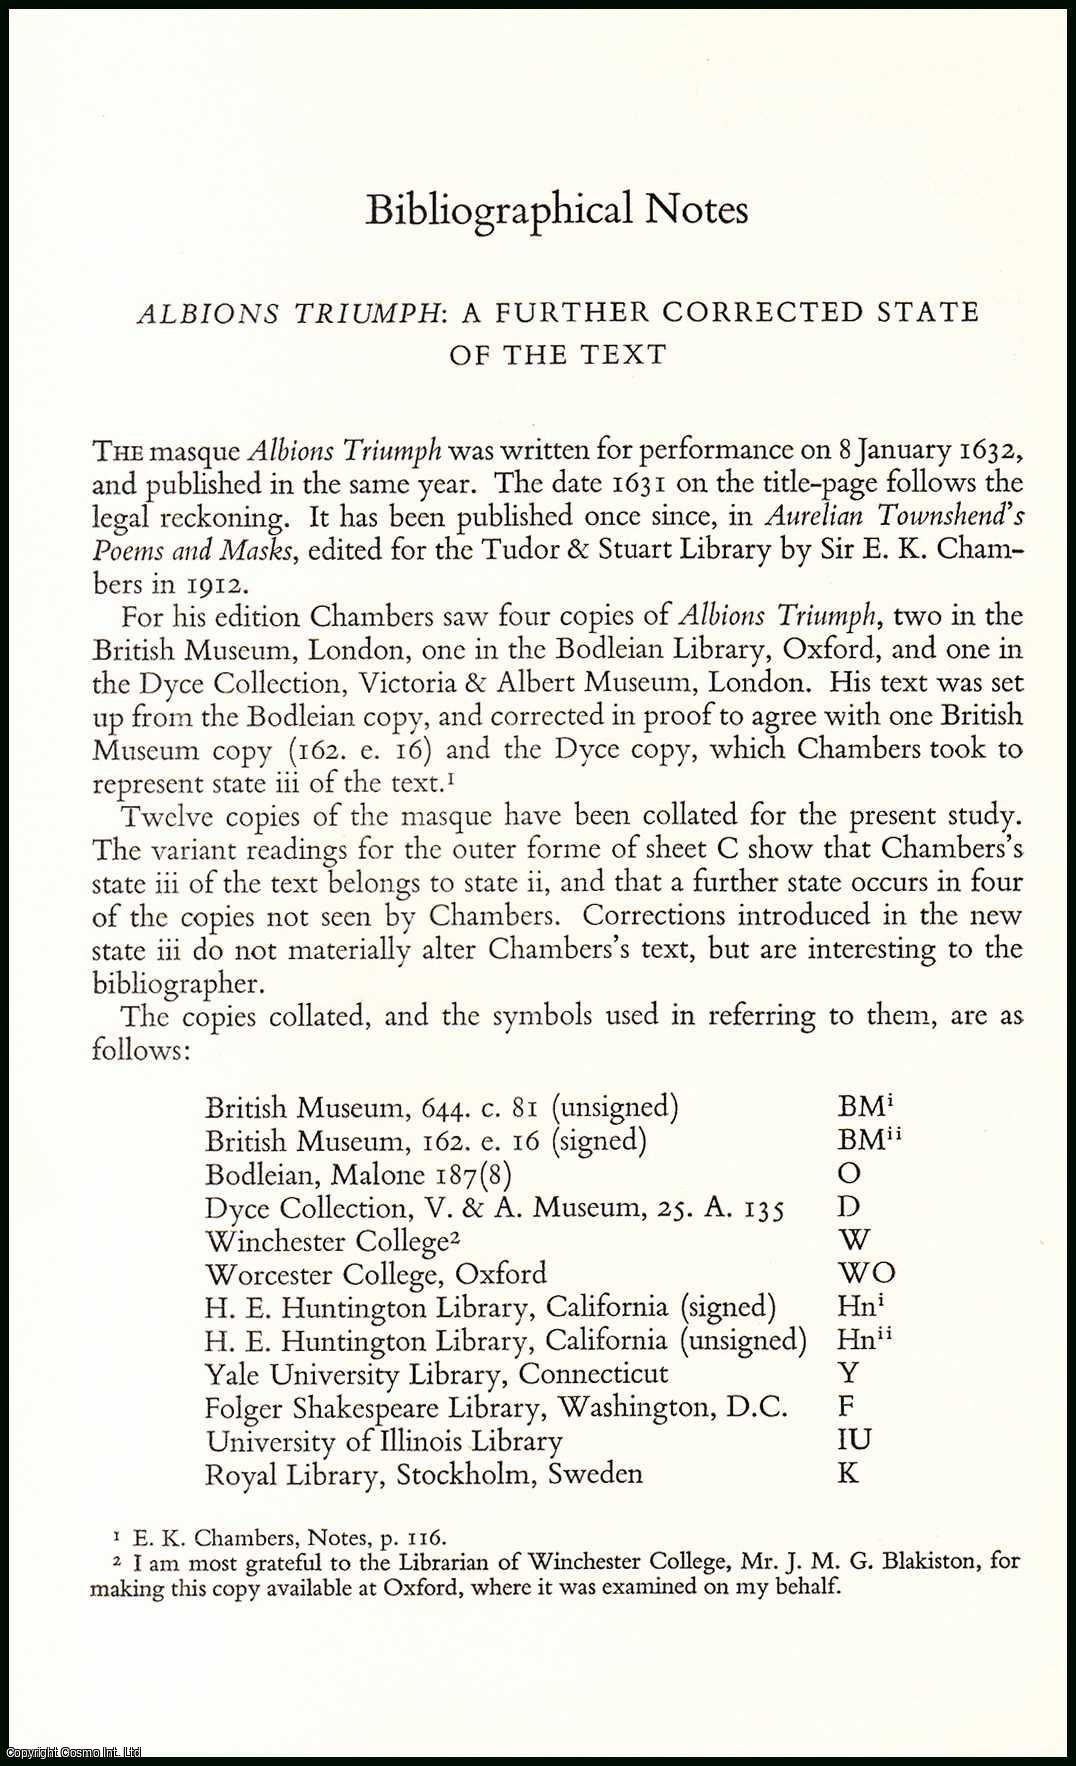 Erica Veevers - Albion's Triumph, a written performance : a further corrected state of the text. An uncommon original article from the Library, 1961.